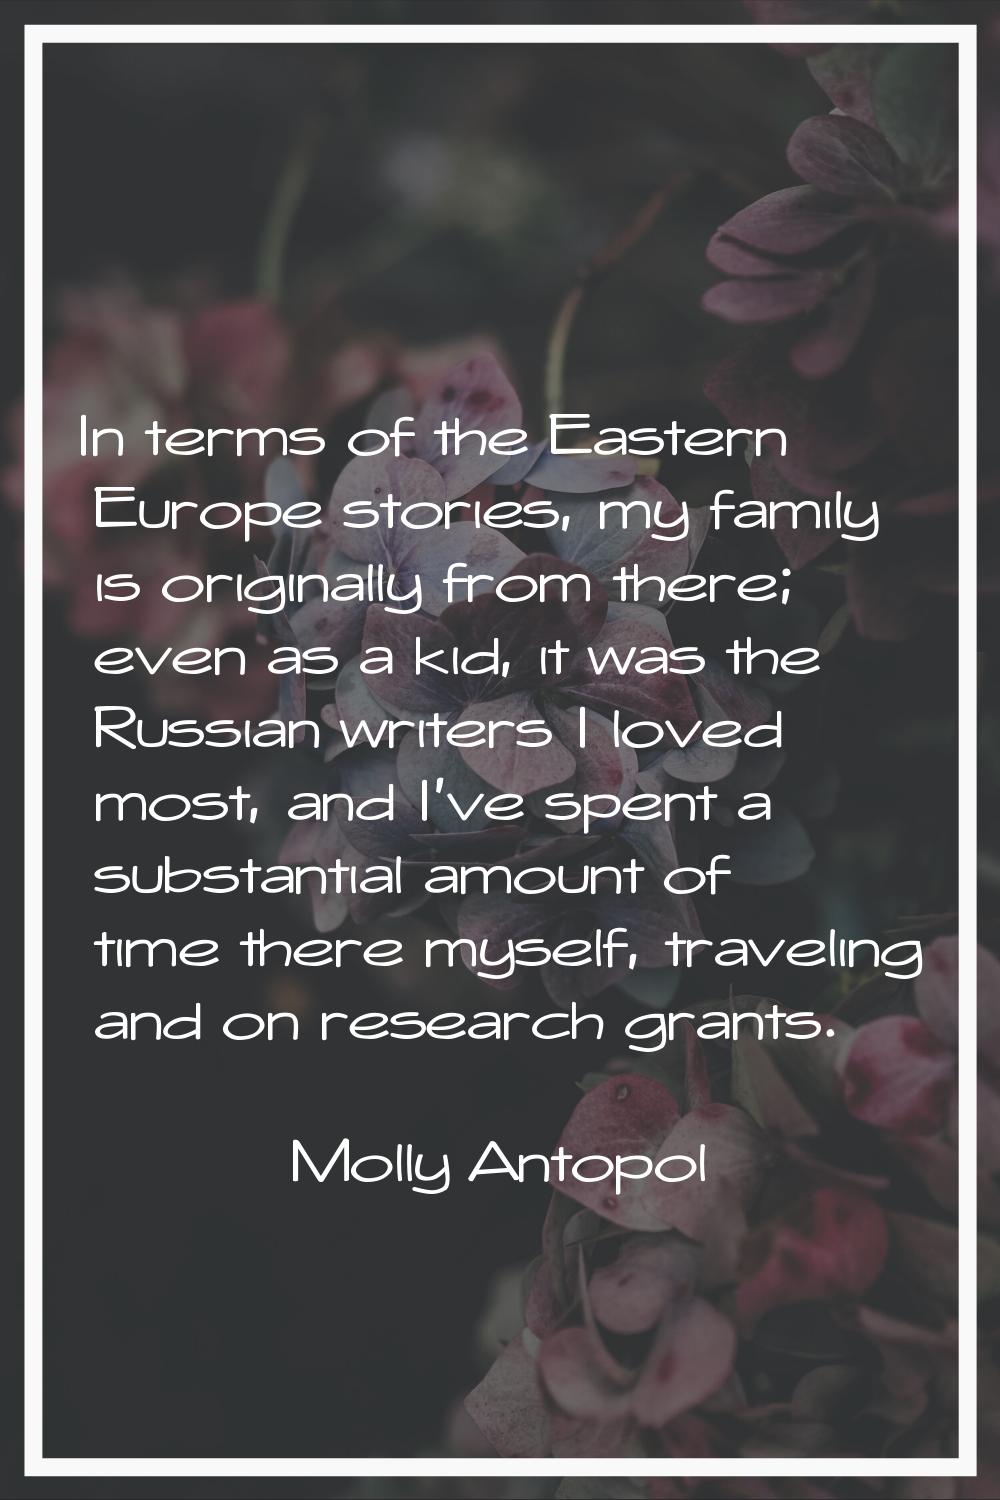 In terms of the Eastern Europe stories, my family is originally from there; even as a kid, it was t